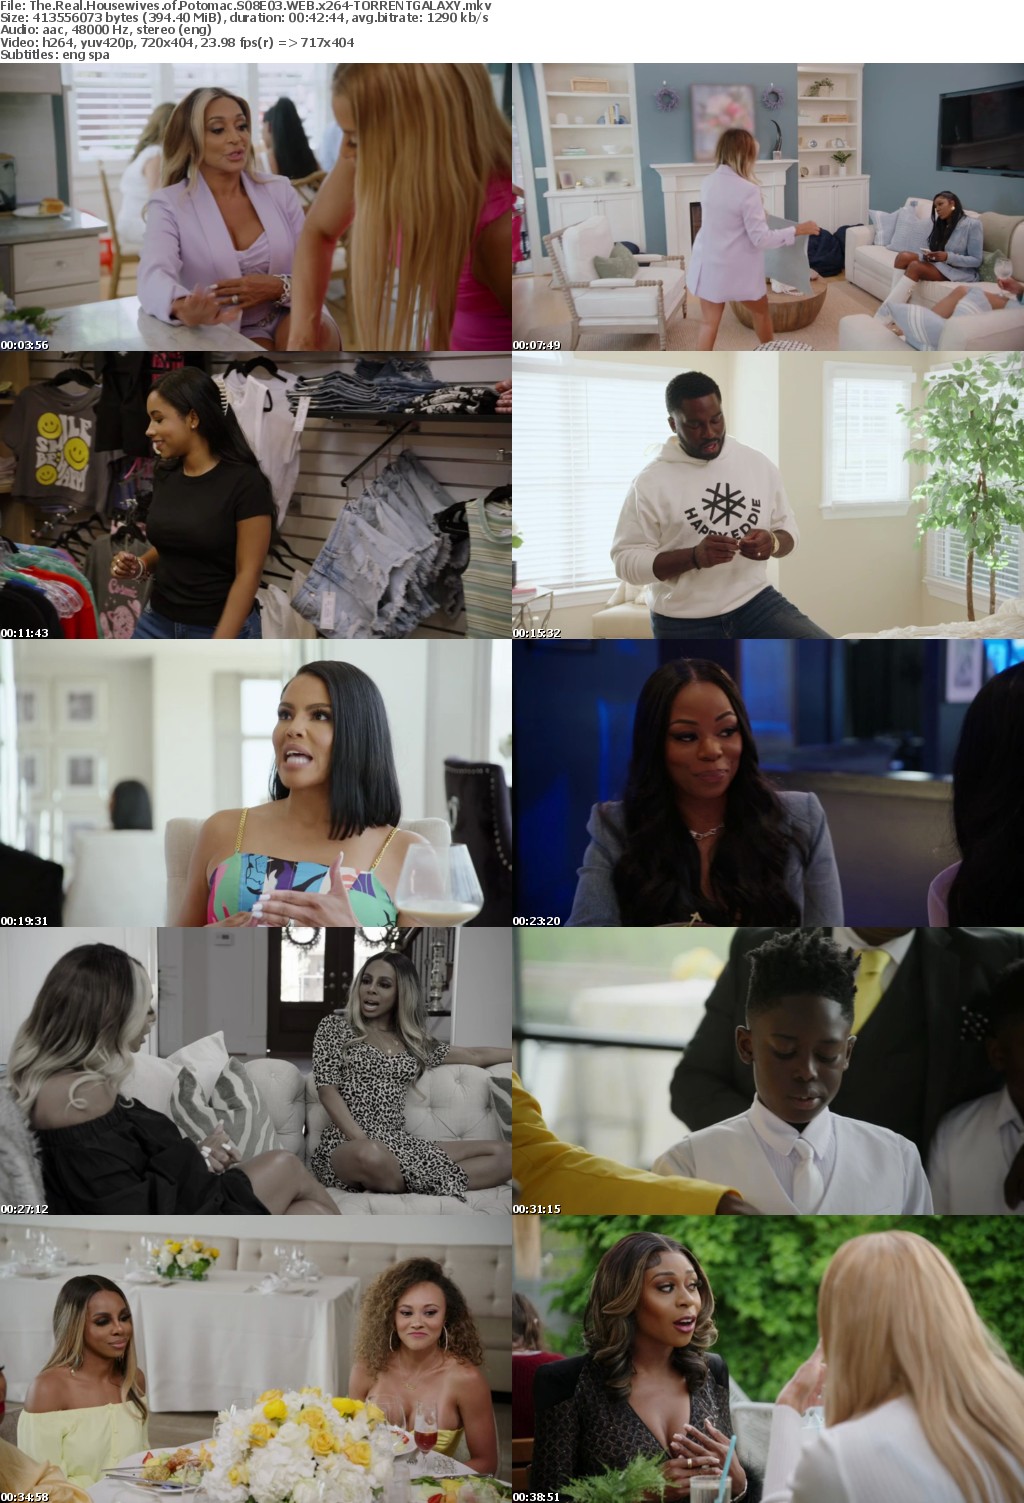 The Real Housewives of Potomac S08E03 WEB x264-GALAXY